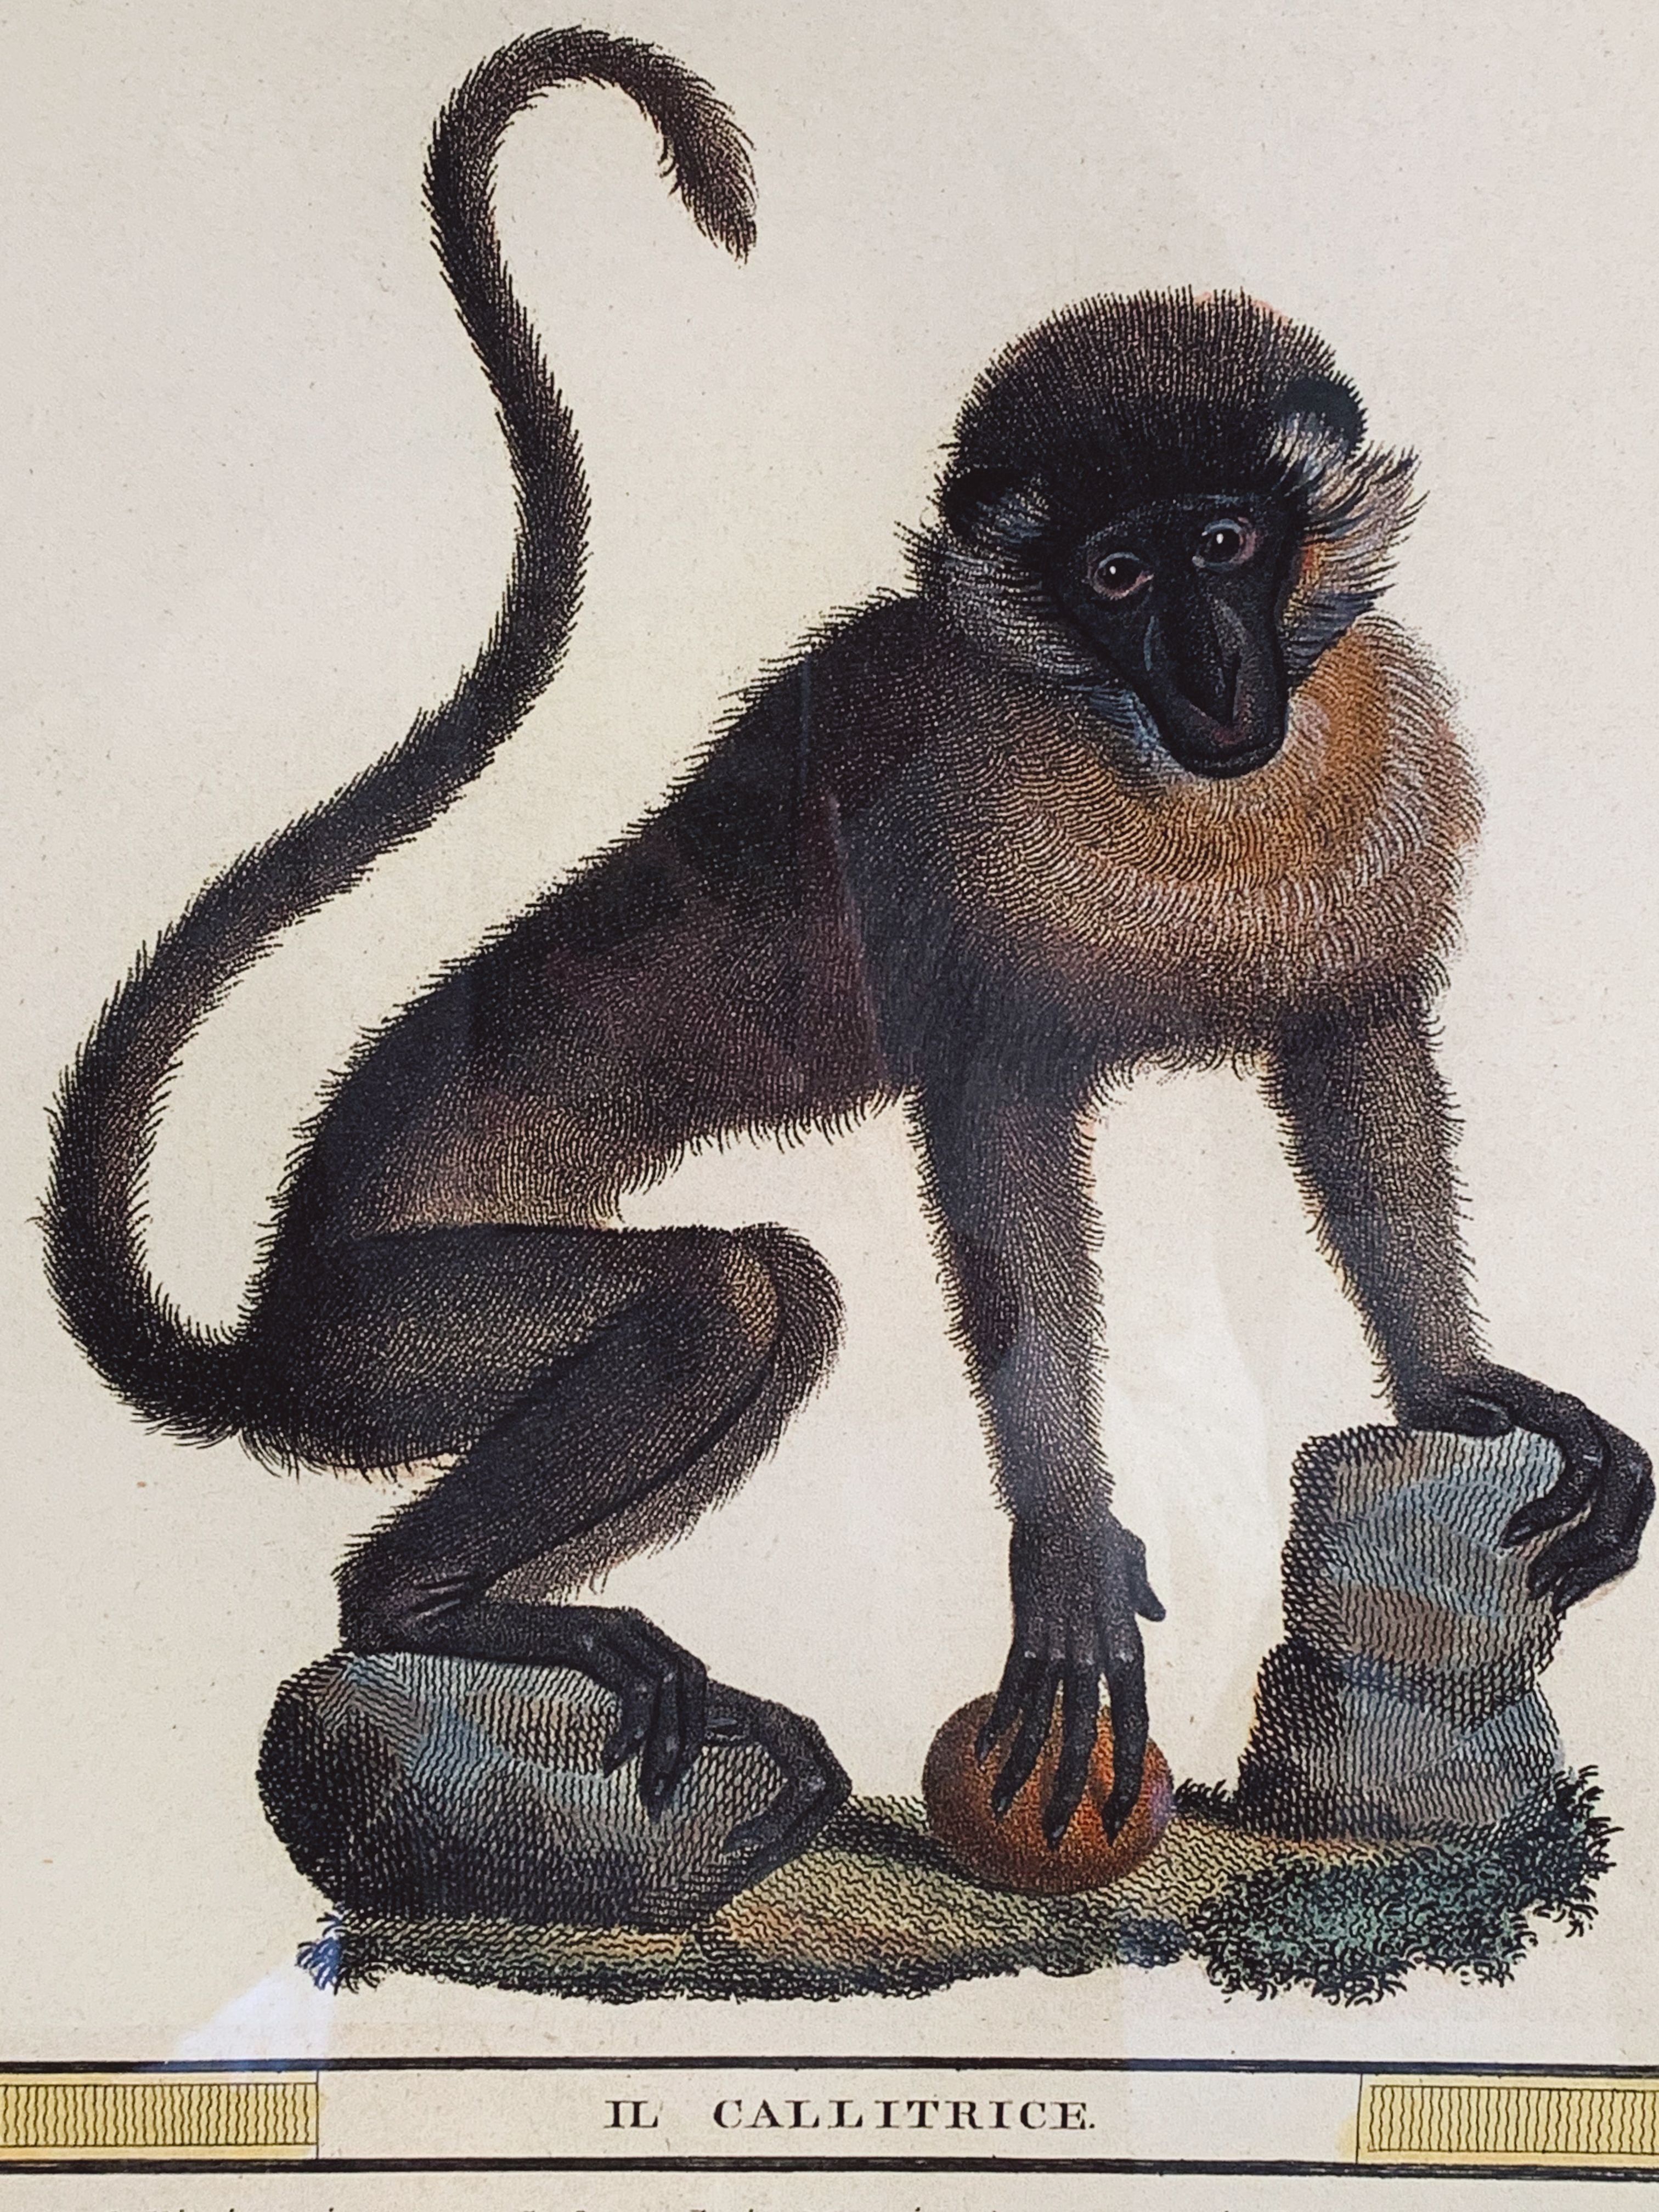 Italian Monkey Art Print in Vintage Frame from Natural History of Primates 1812 | IL. Callitrice | Wall Art | Playing Monkey | Vintage Natural History Print